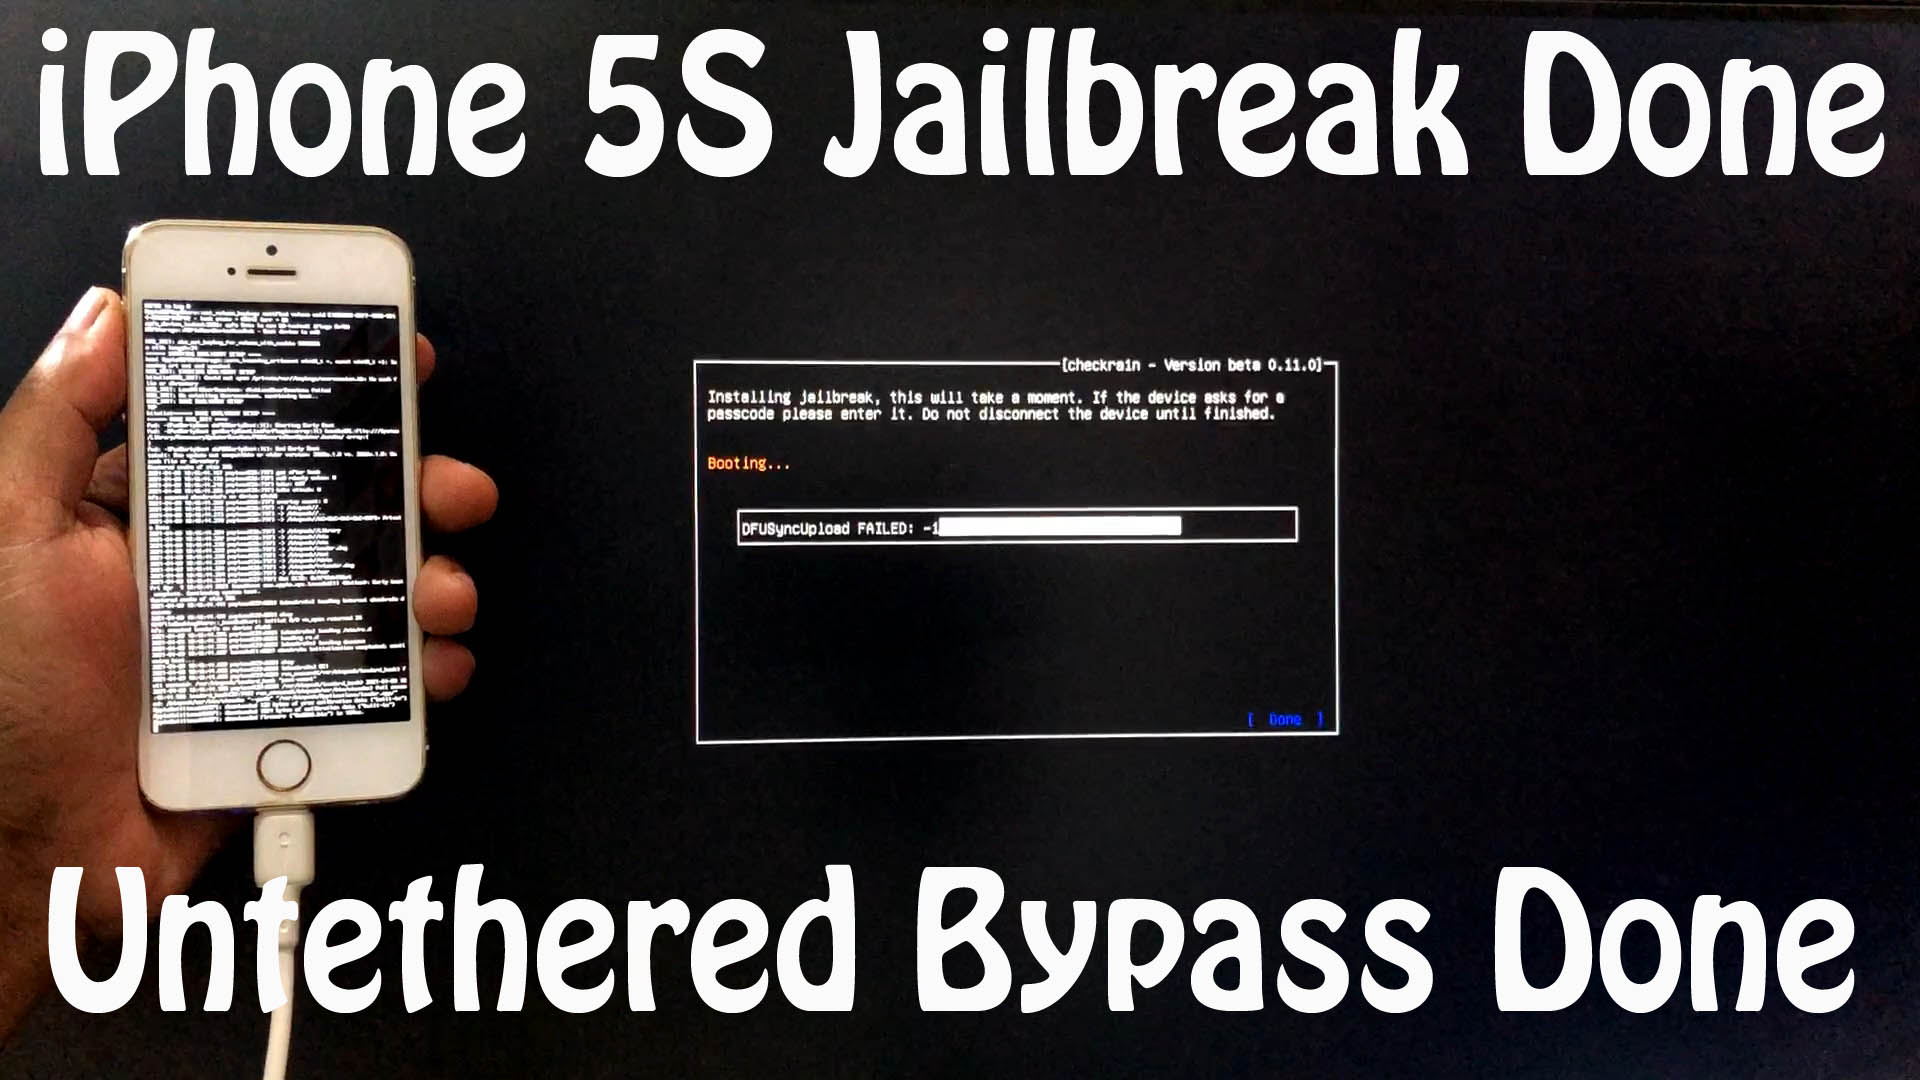 Windows Iphone 5s Jailbreak Done Bypass Untethered Iphone 5s Icloud Activation Lock 21 Icloudfrp